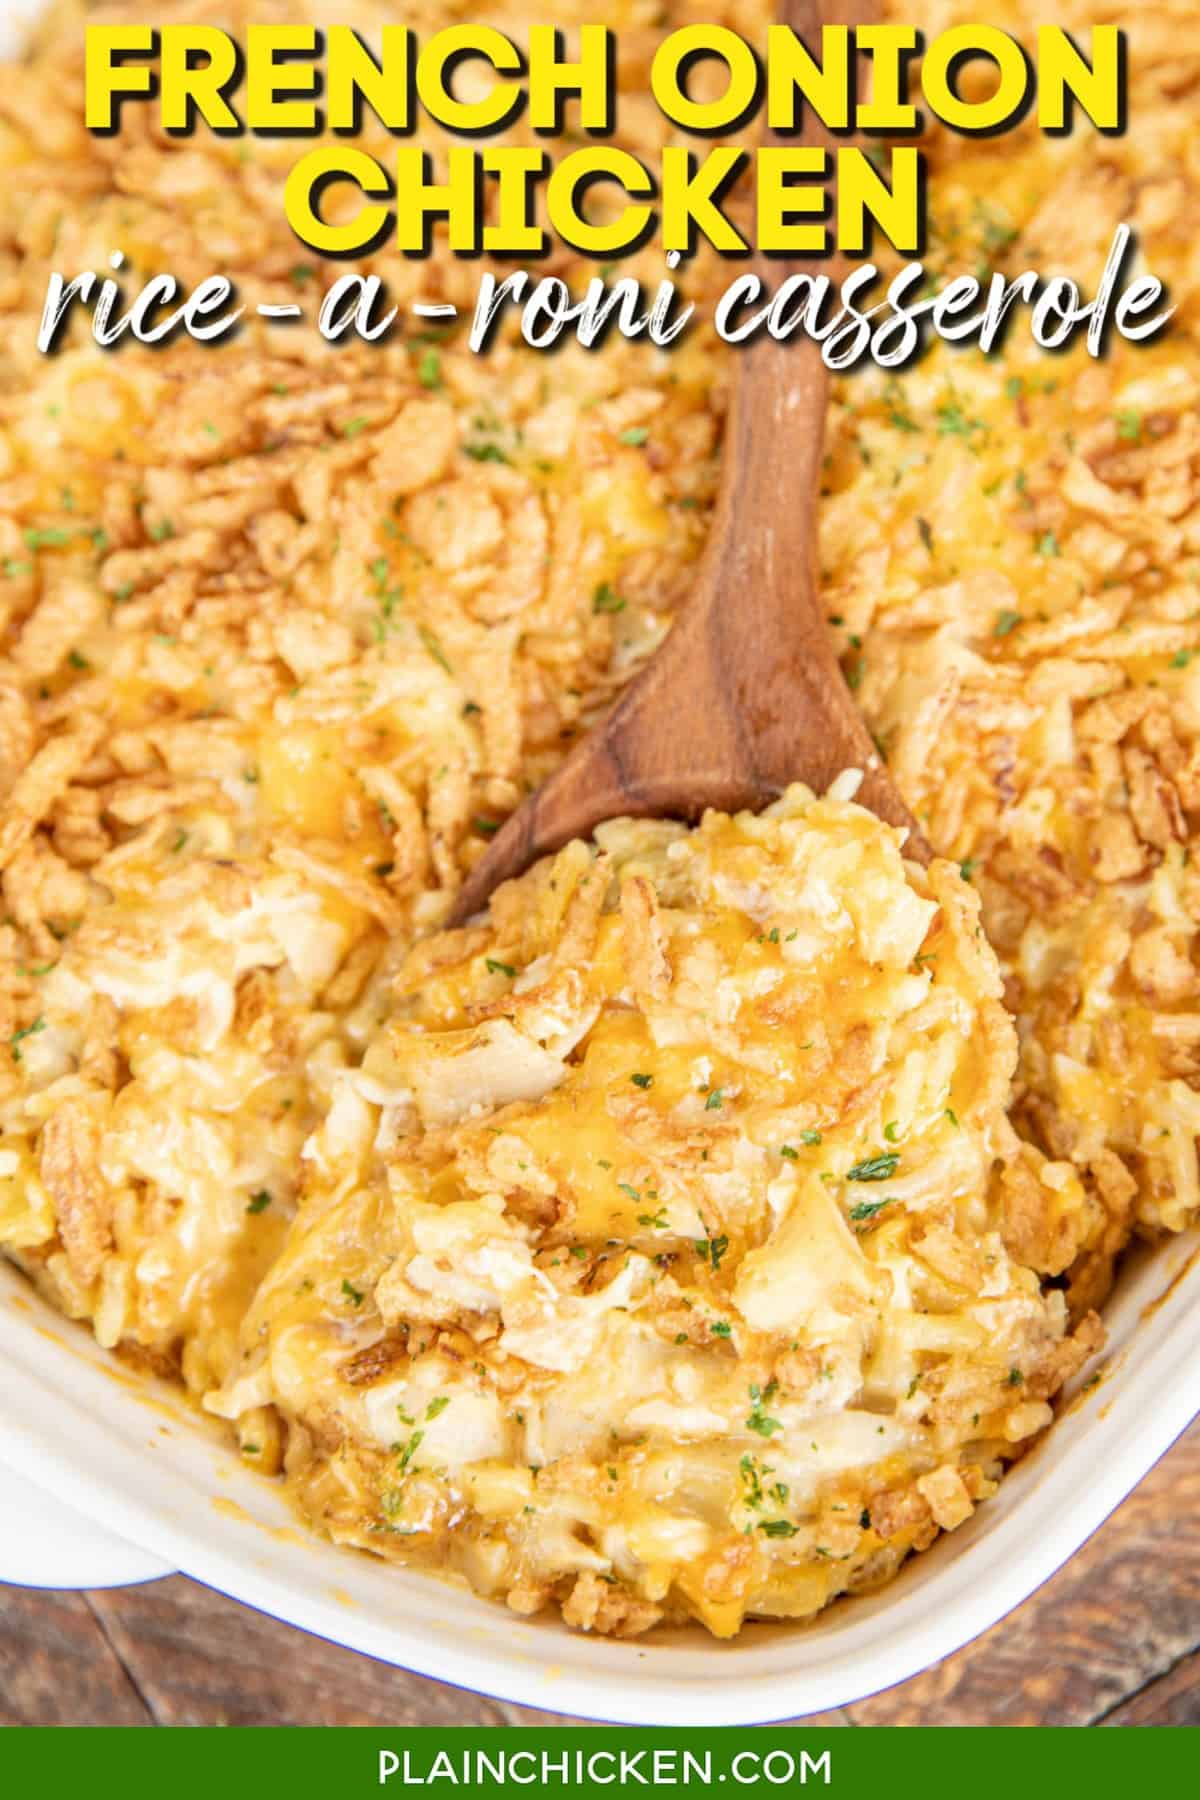 Save on Rice-A-Roni Creamy Four Cheese Flavor Rice Cup Order